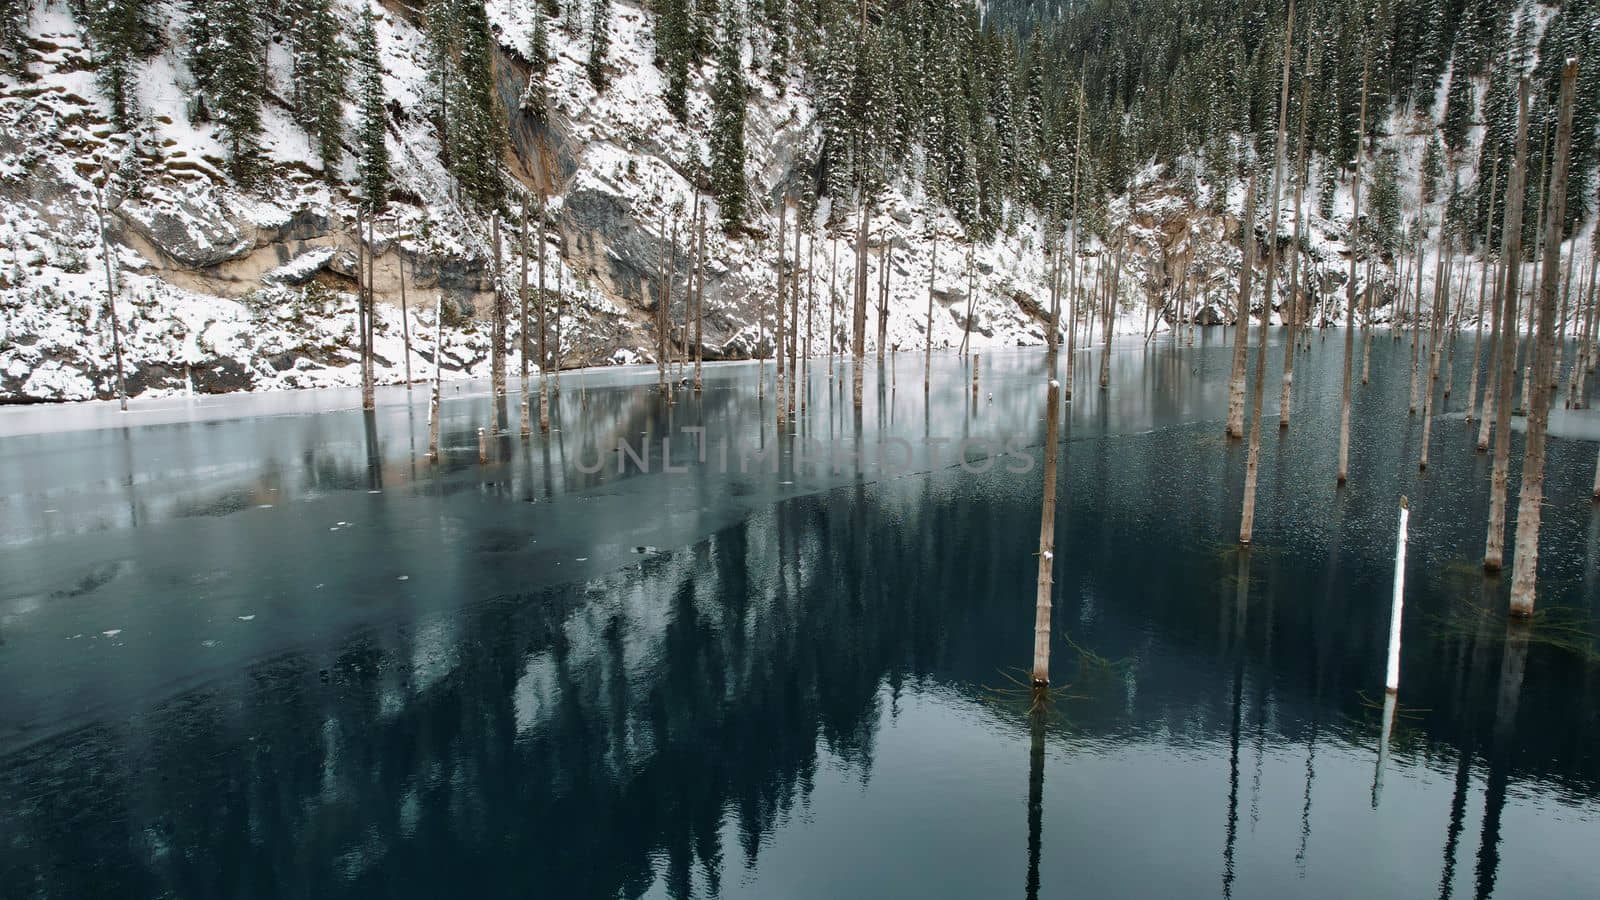 Coniferous tree trunks come out of a mountain lake by Passcal